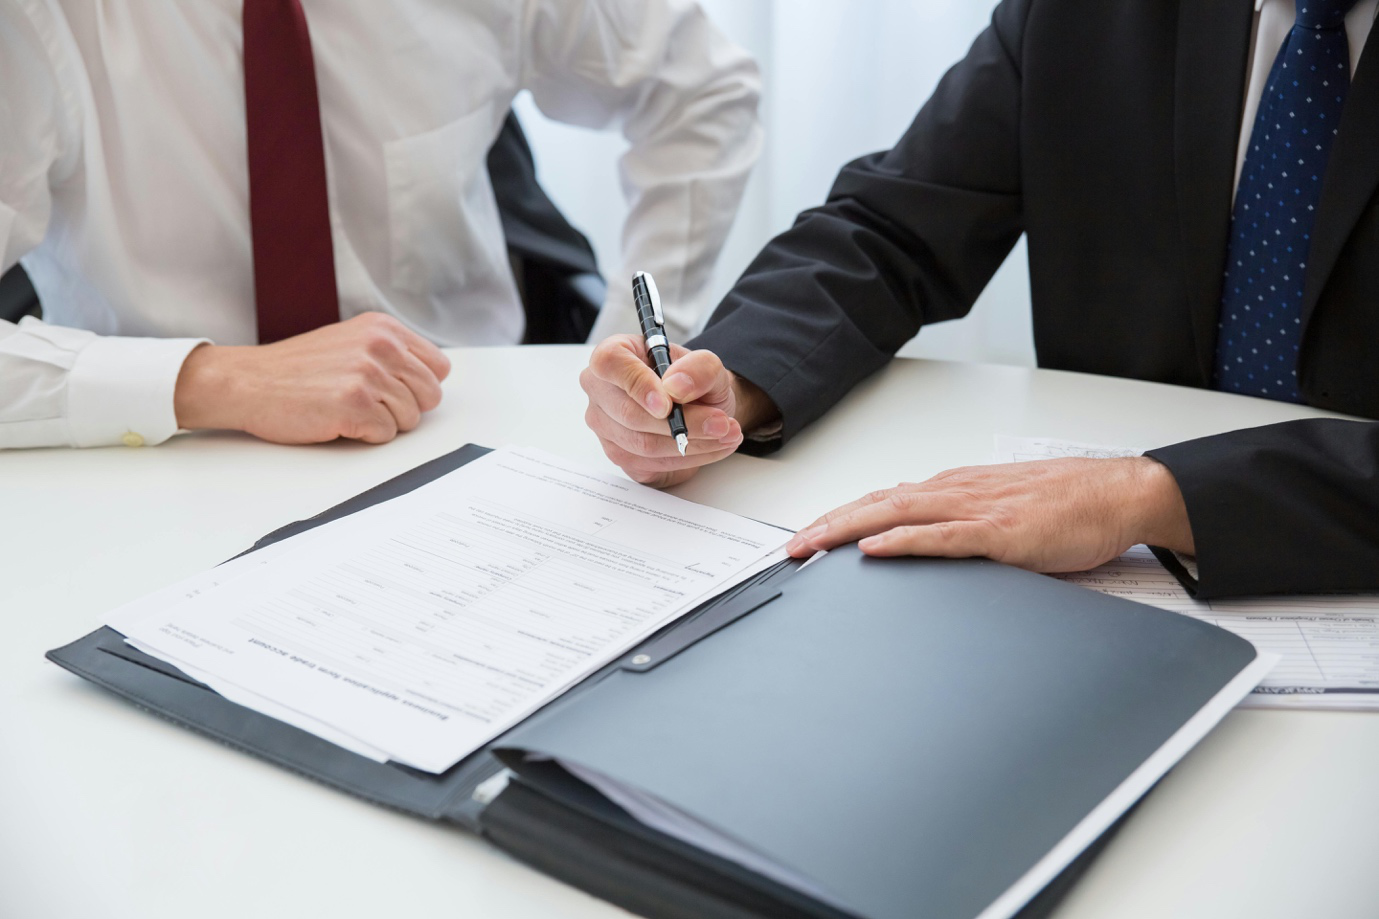 9 Essential Clauses to Protect Your Business in Contracts